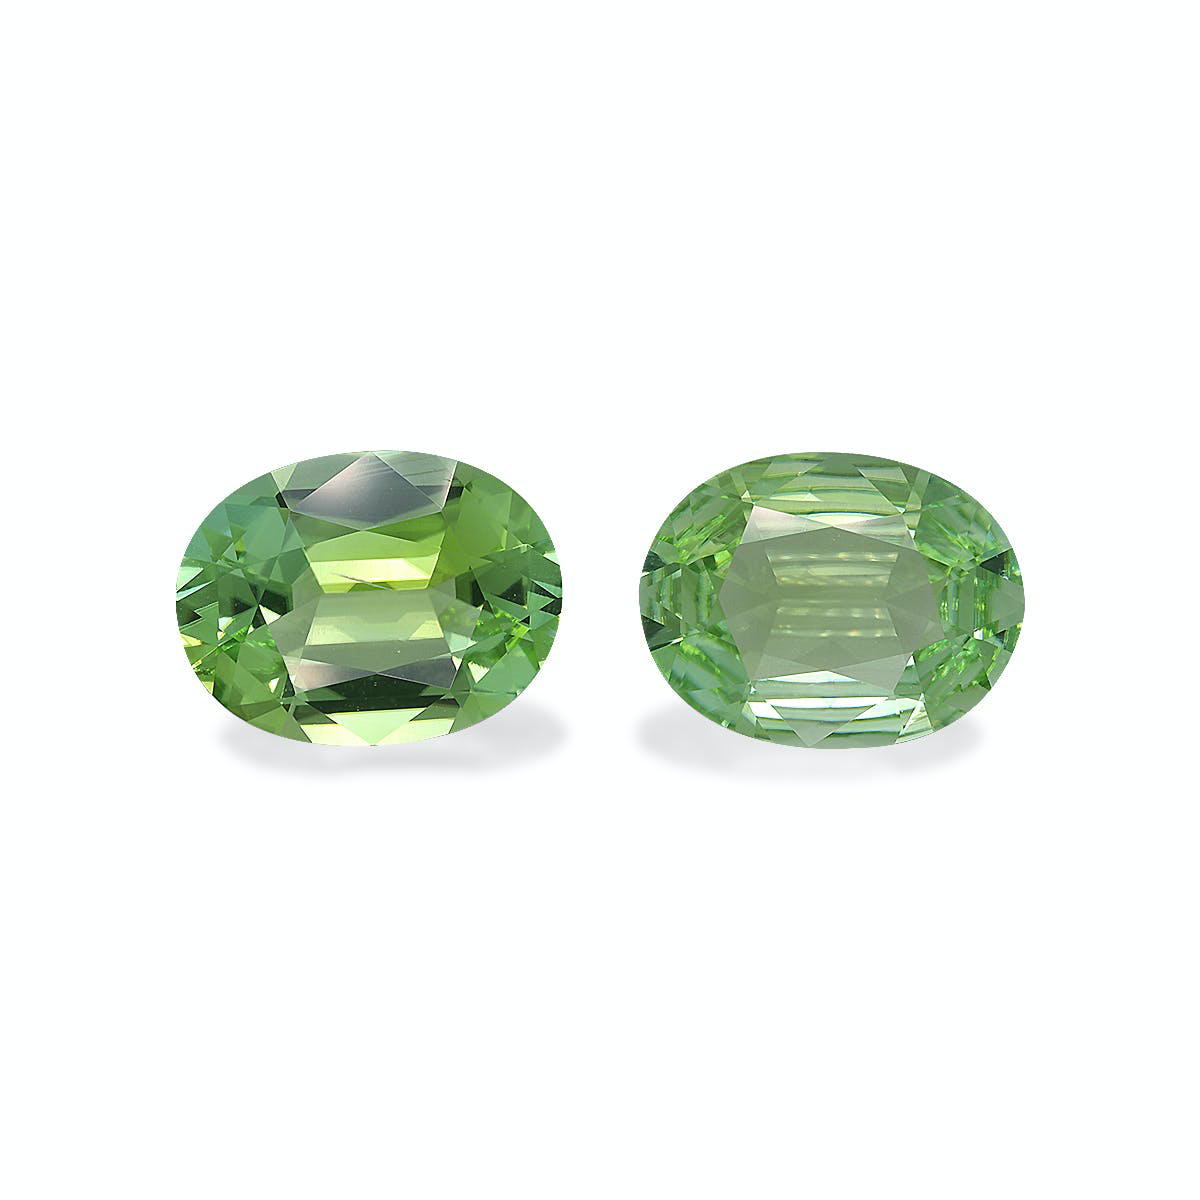 Picture of Green Tourmaline 13.72ct - Pair (TG1639)